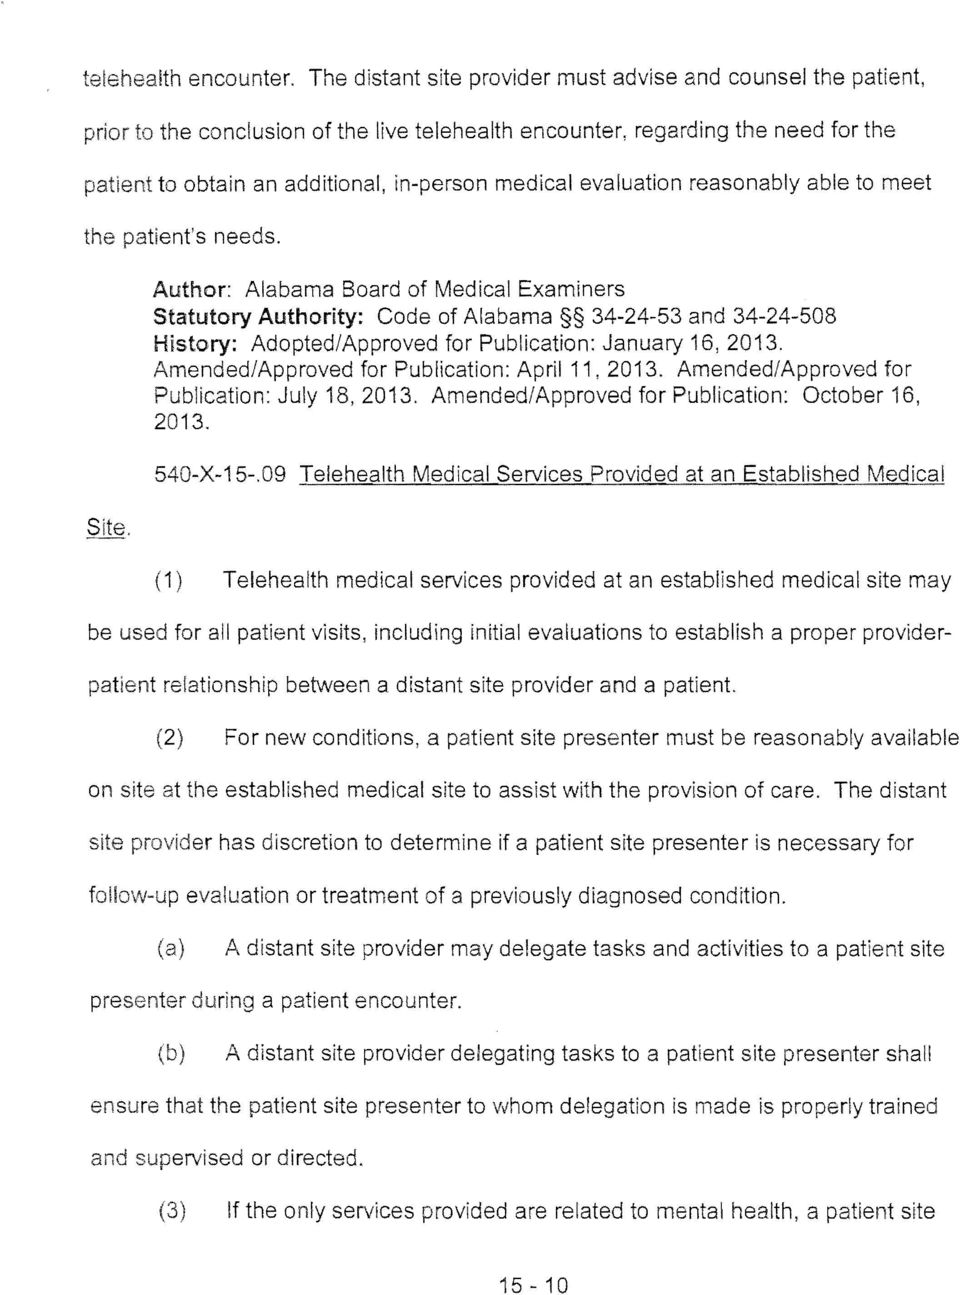 reasonably able to meet patient's needs. Amended/Approved for Publication: April 11, 2013. Amended/Approved for 2013. 540-X-15-.